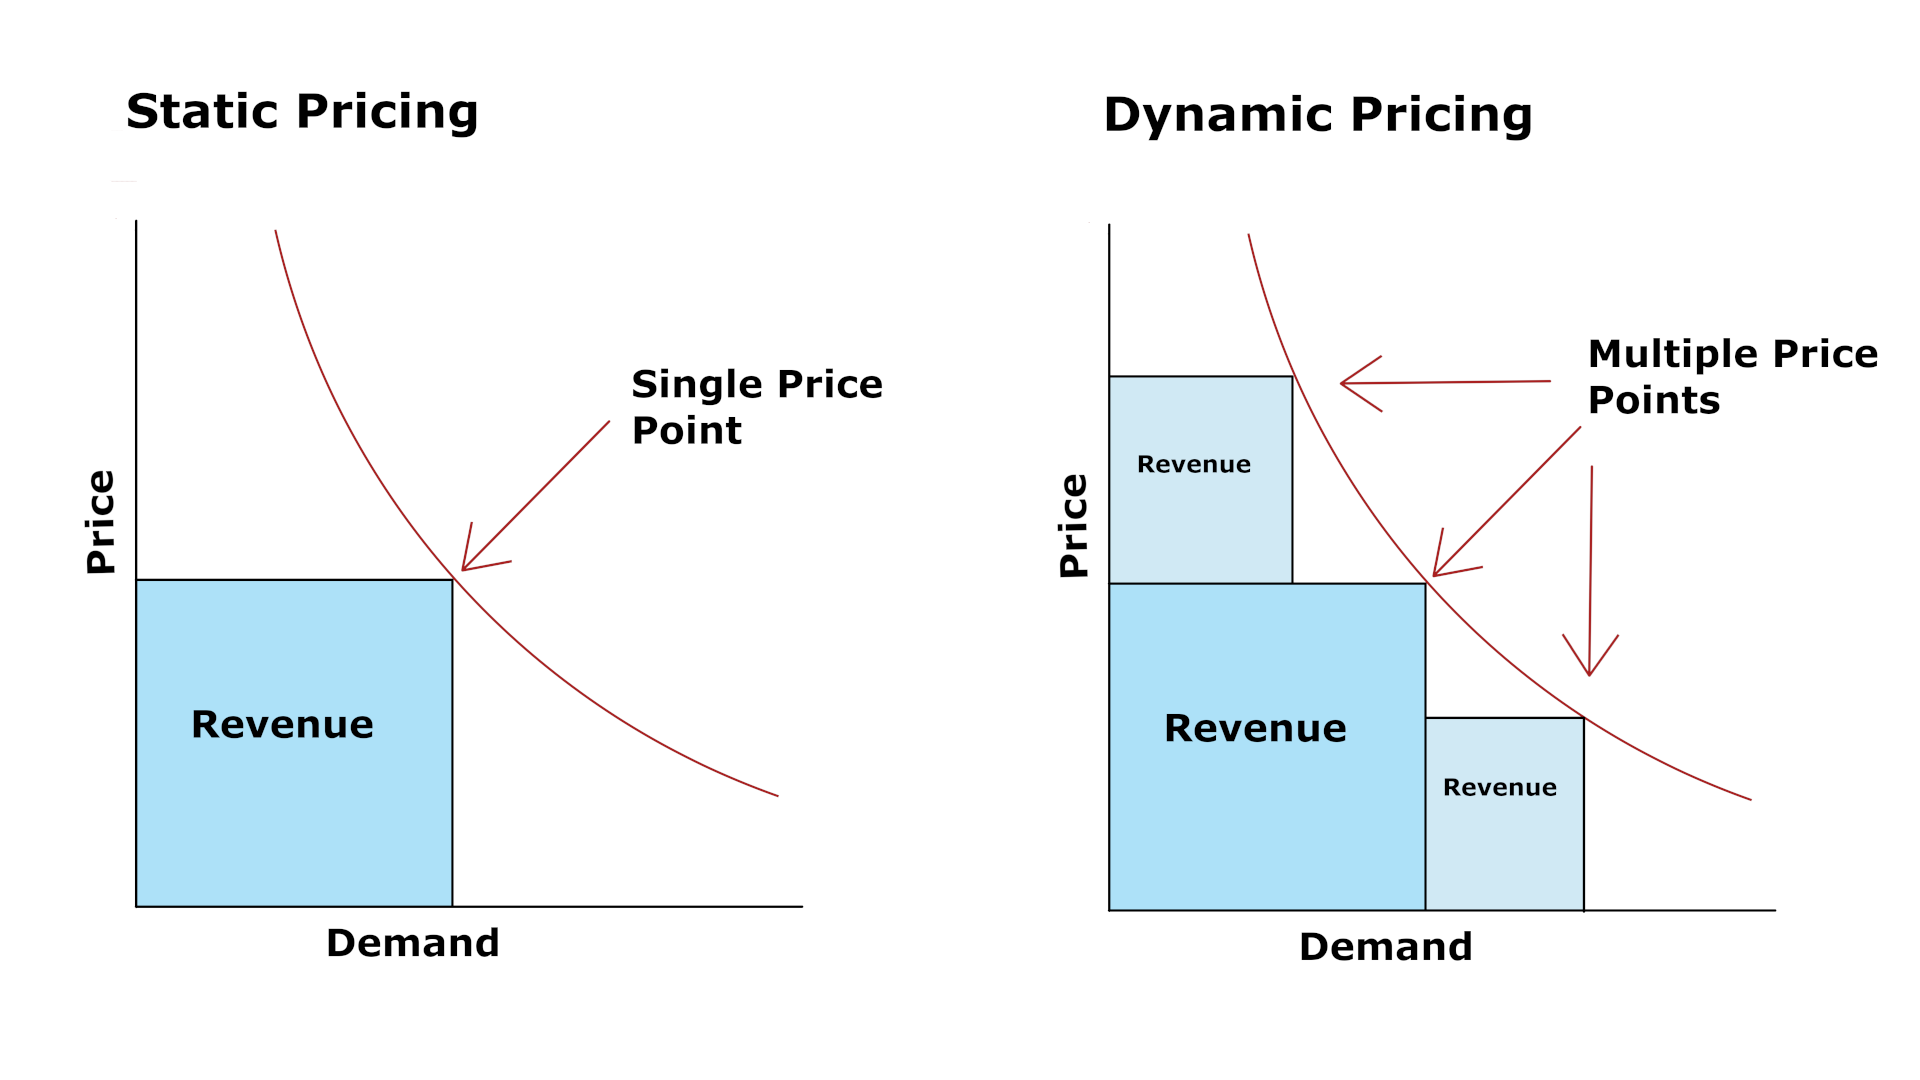 Two graphs next to each other, the one on the left shows a static pricing model and the one on the right shows a dynamic pricing model